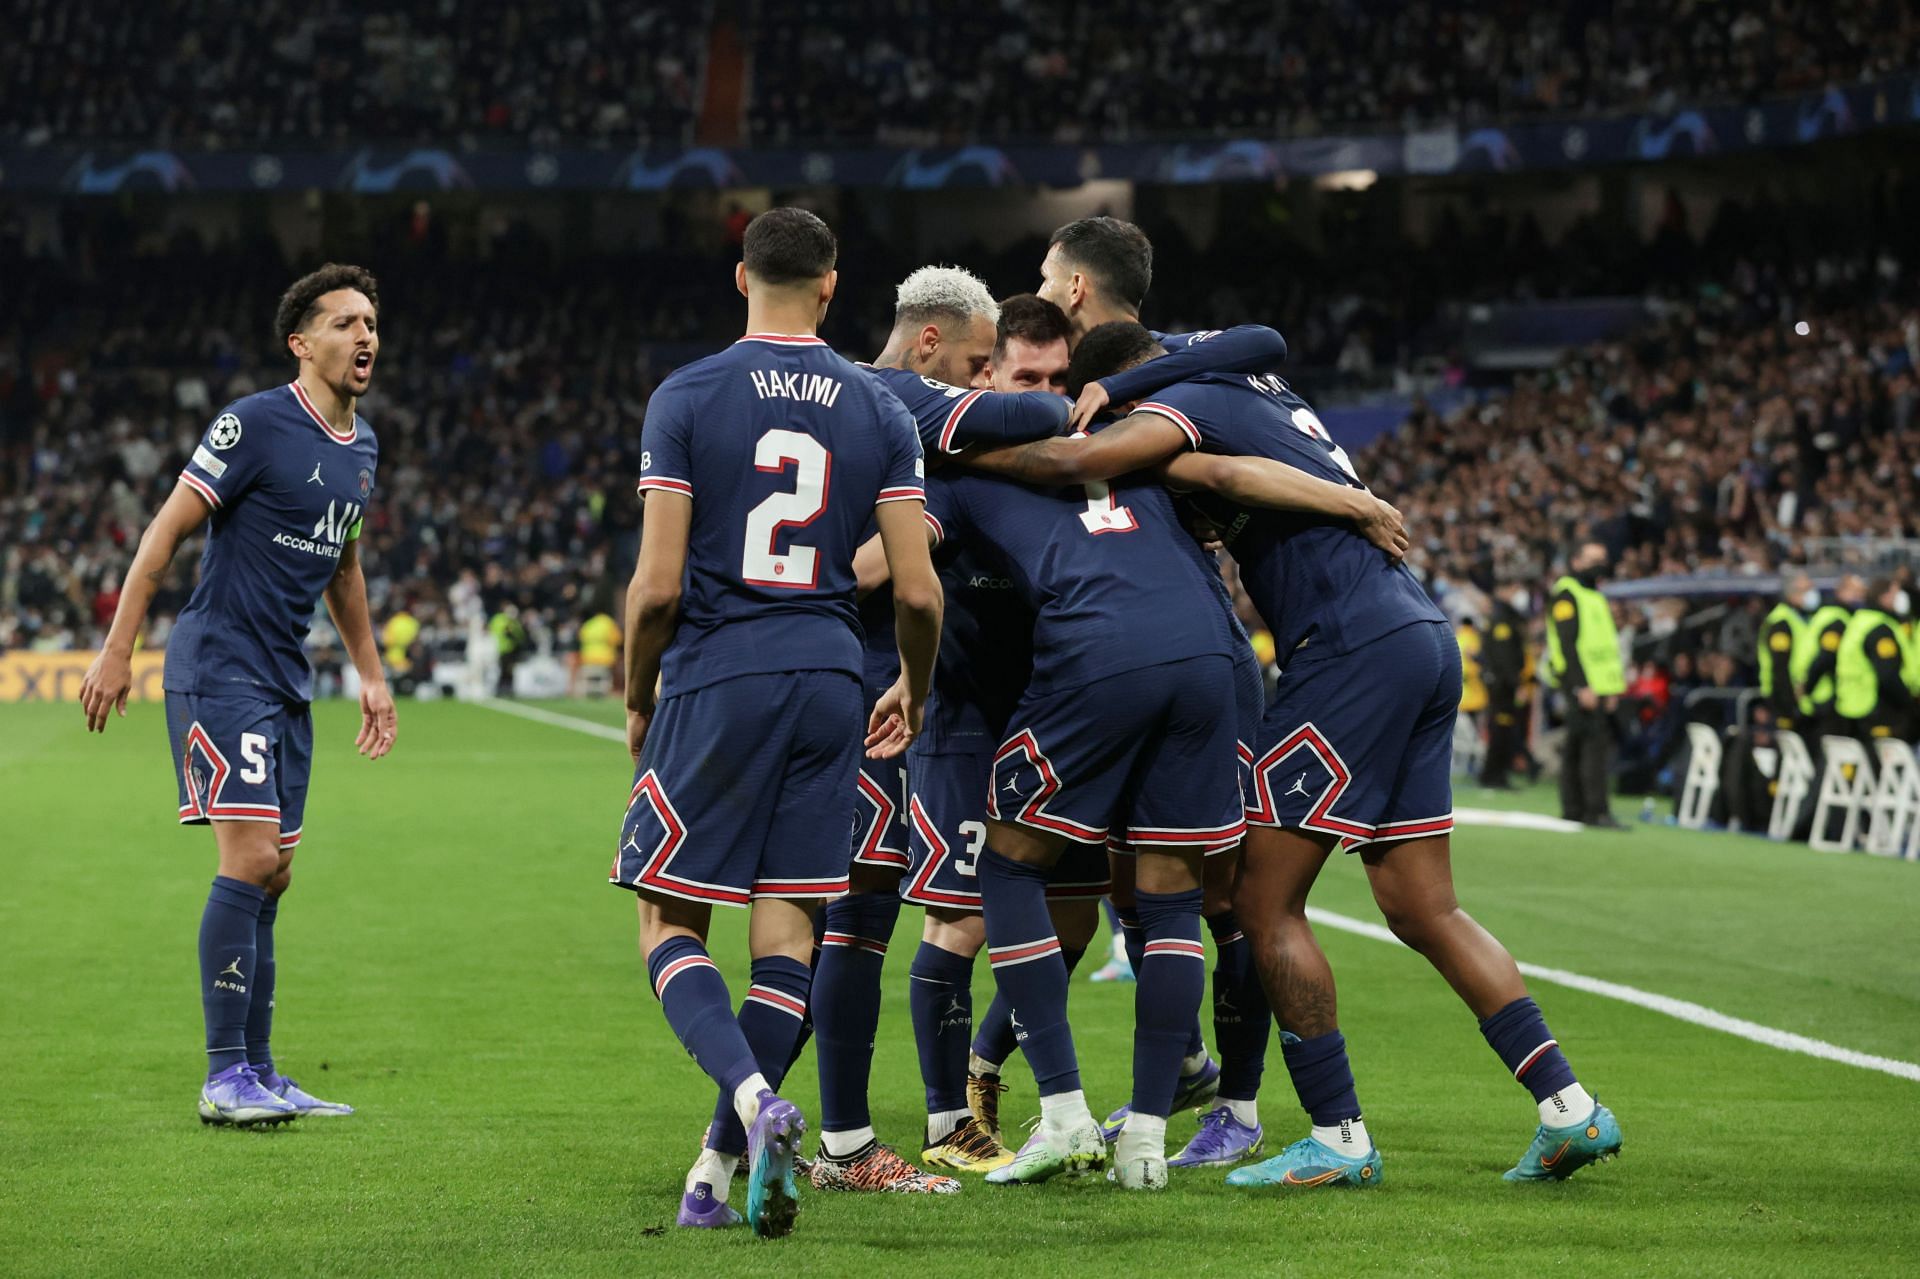 PSG recently lost to Real Madrid in a UEFA Champions League match